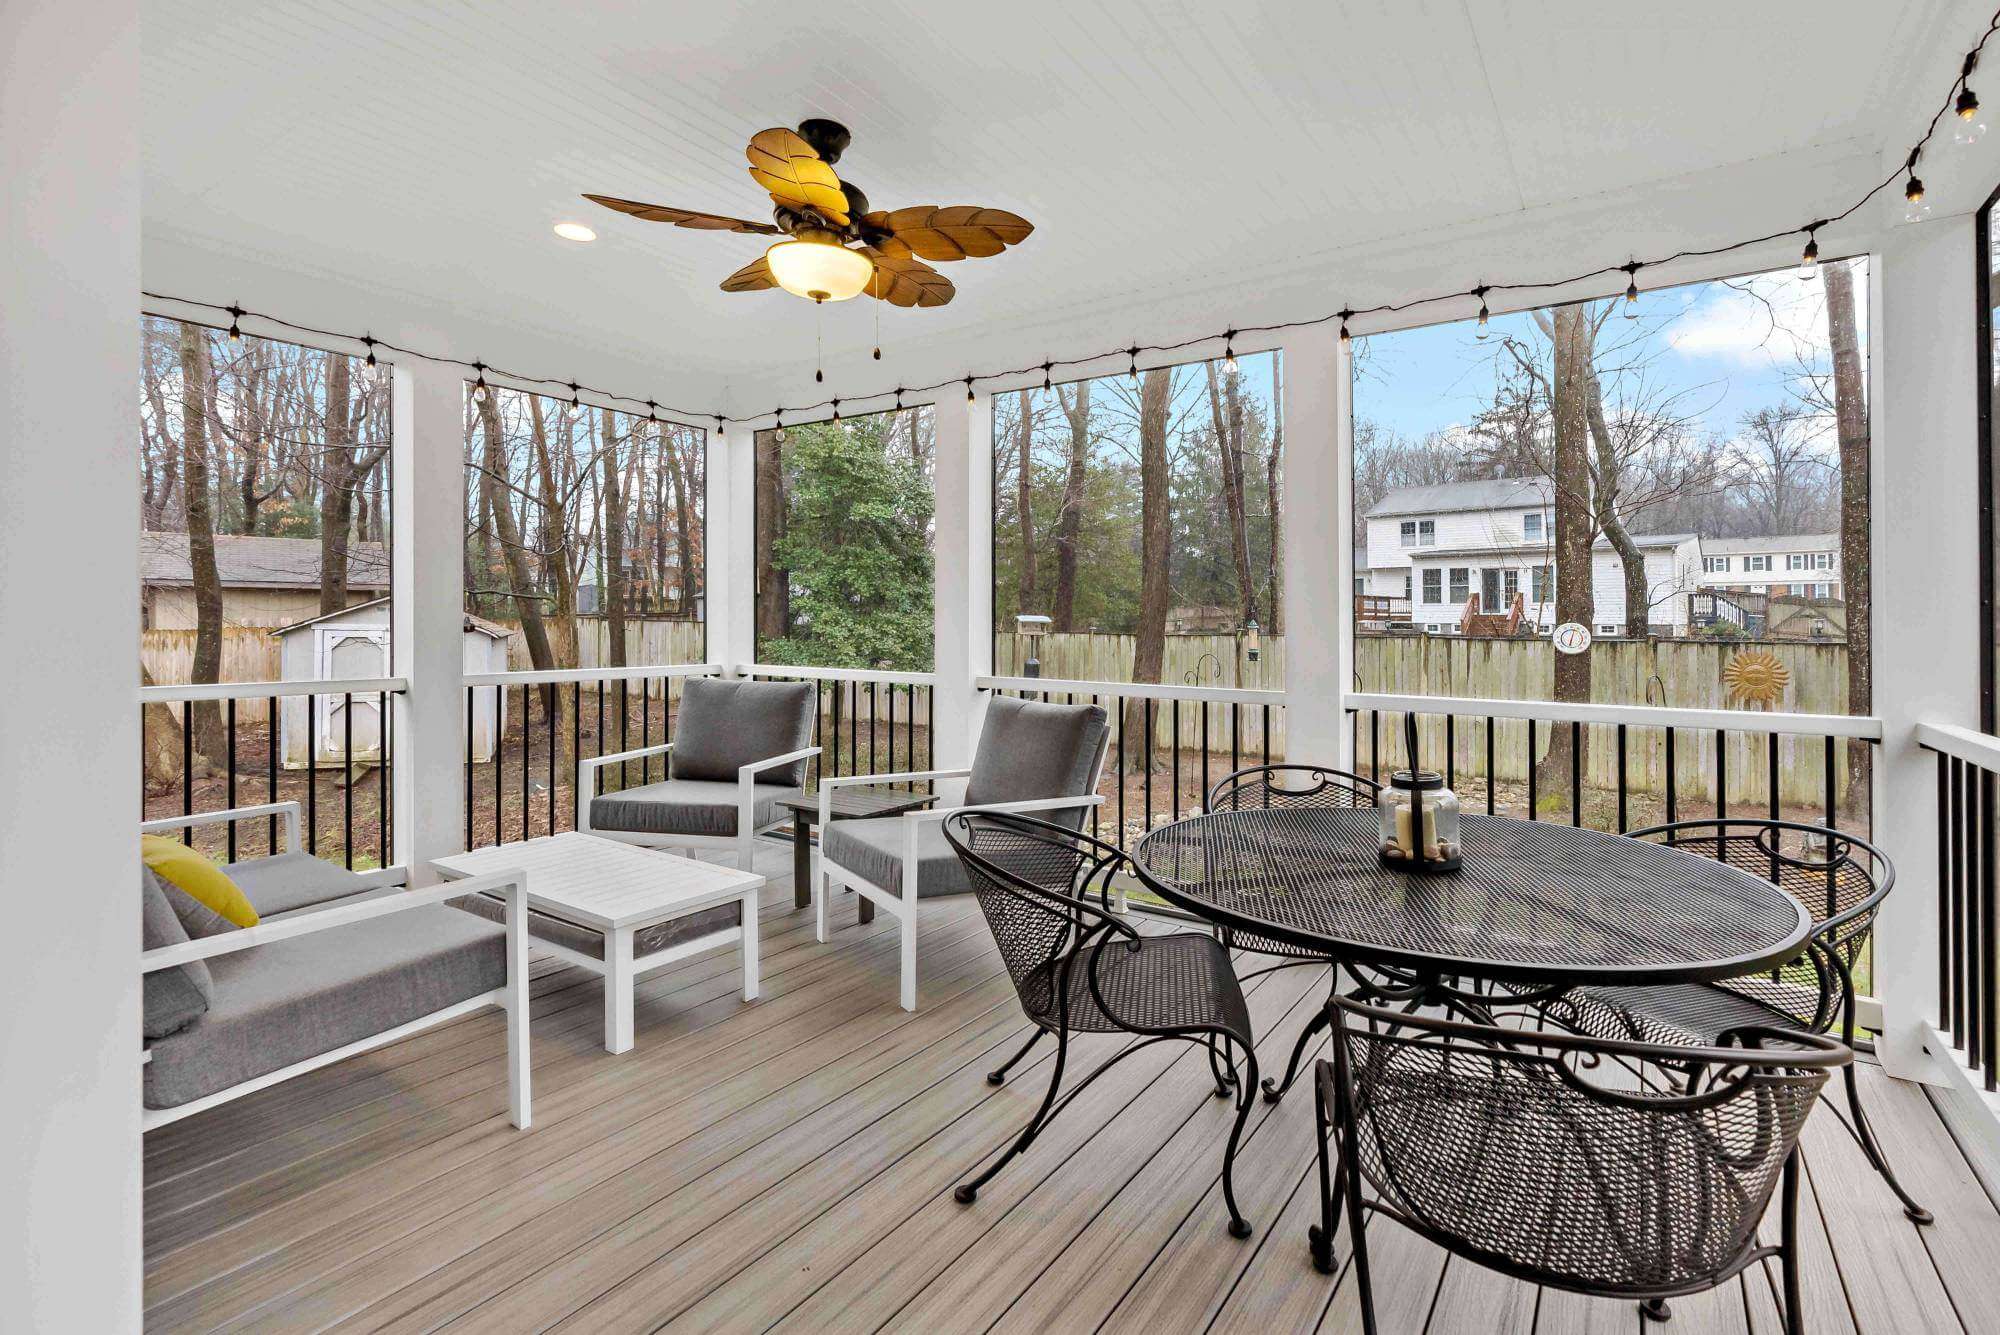 Interior of screened porch with hard wood flooring and ceiling fan